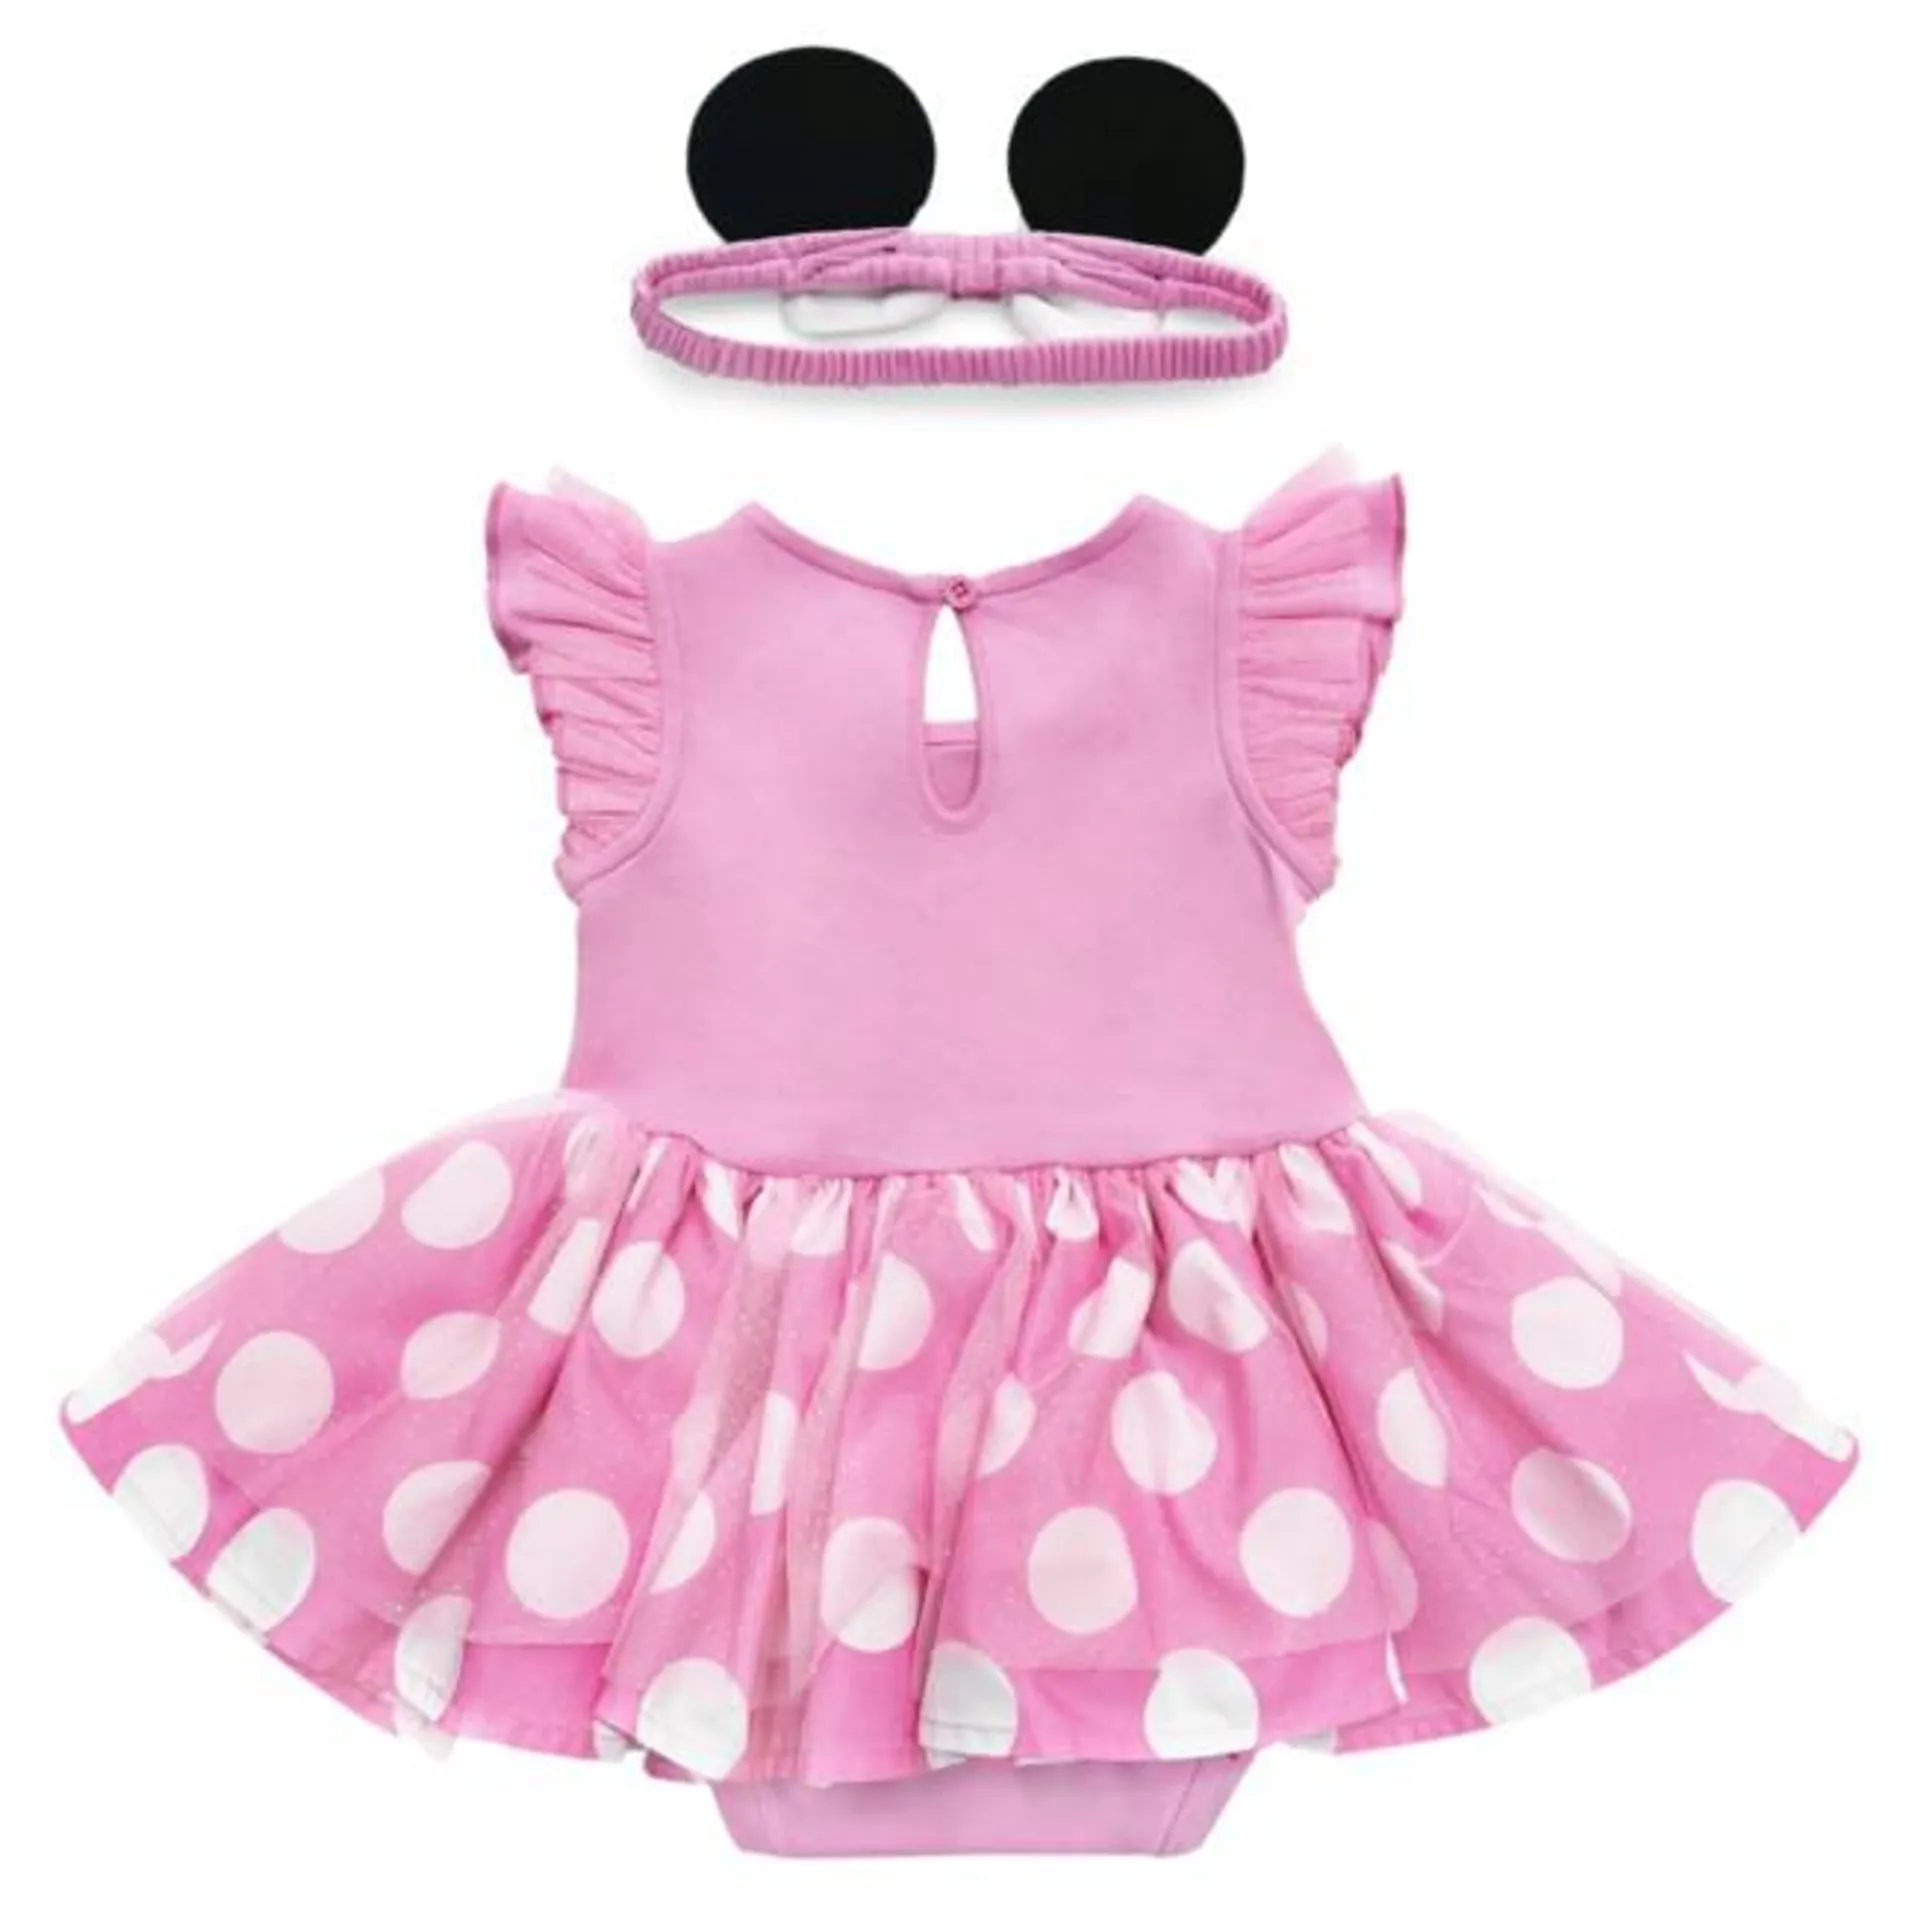 Disney Store Minnie Mouse Pink Baby Costume Body Suit